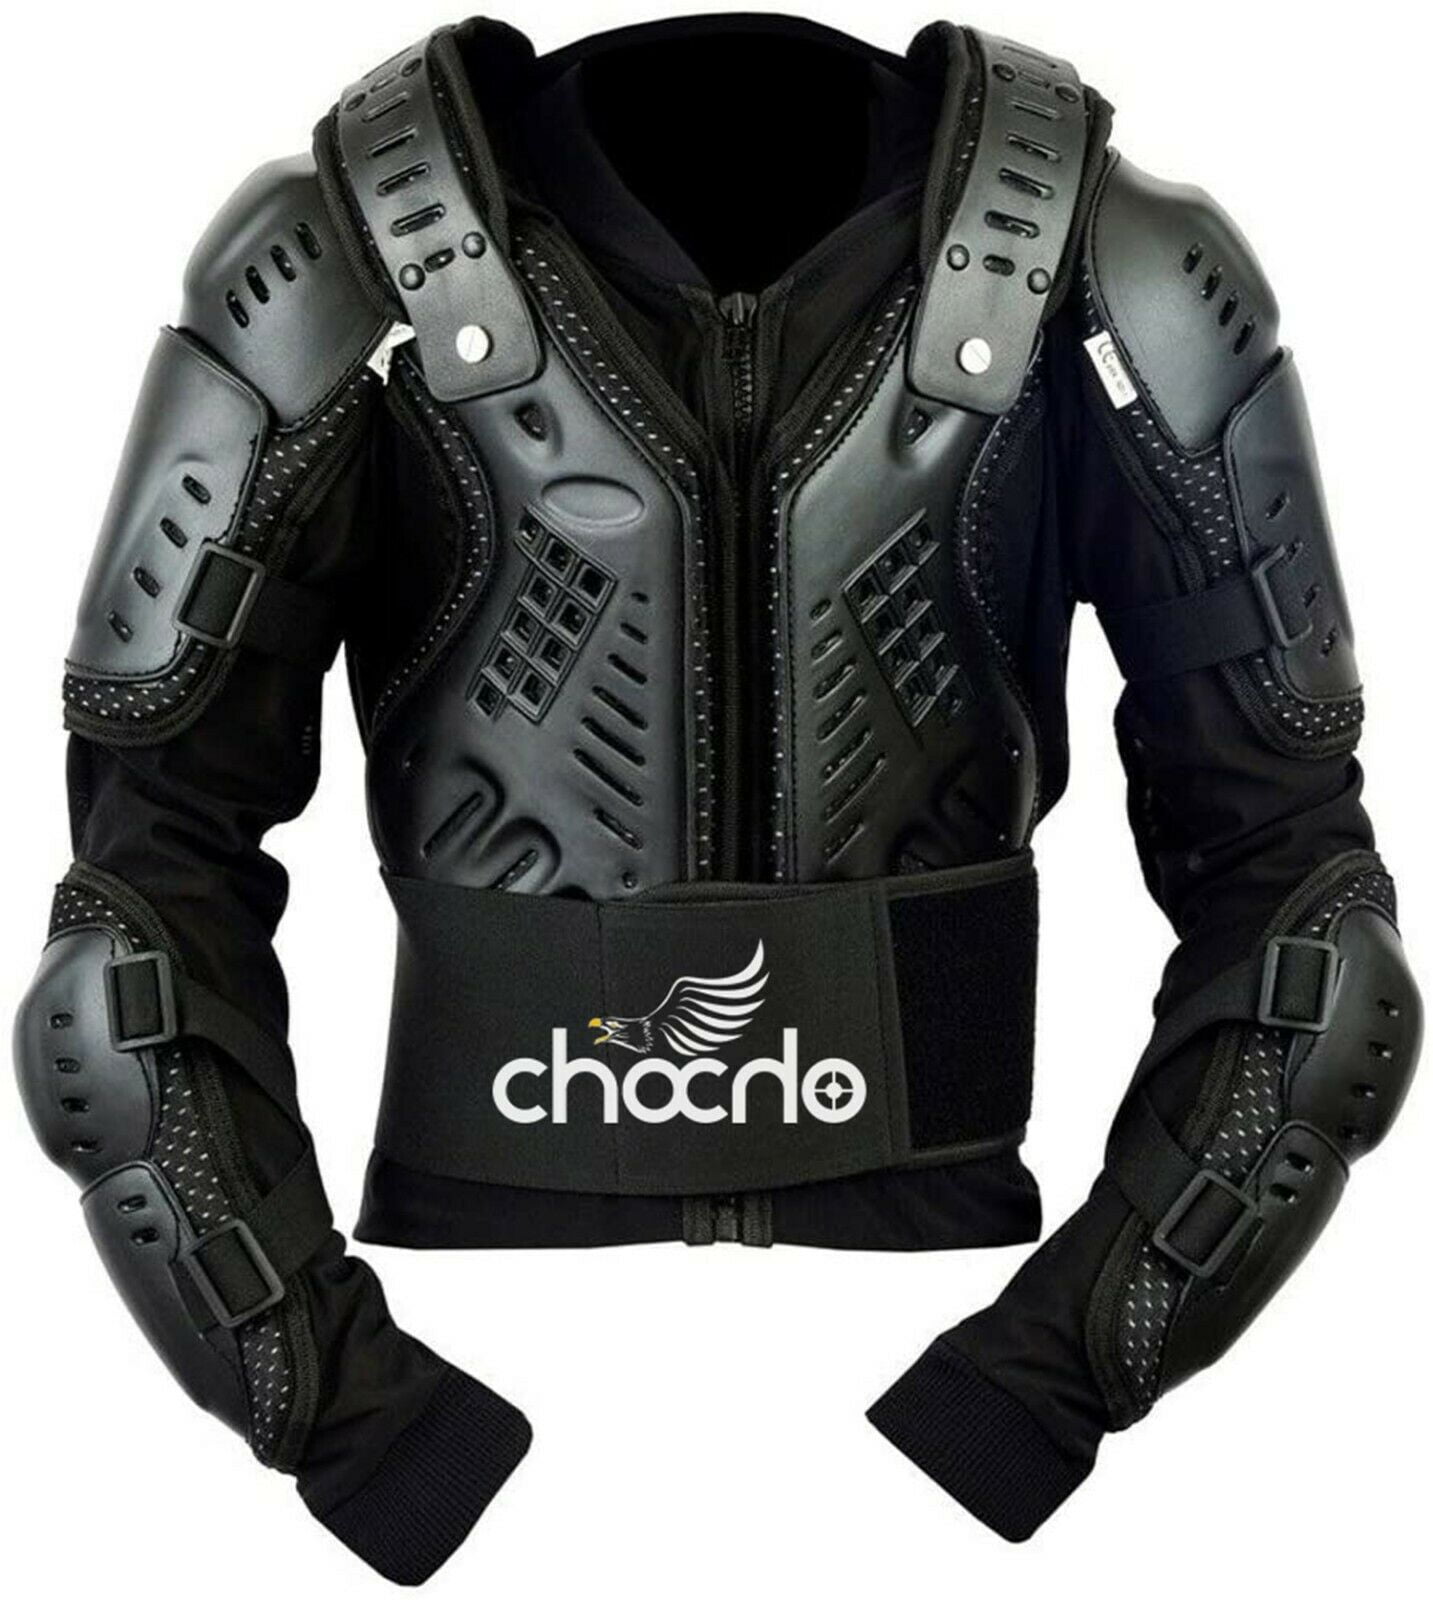 Adult Body Armour CE Approved Motocross Enduro Off road Chest Spine Guard Jacket 